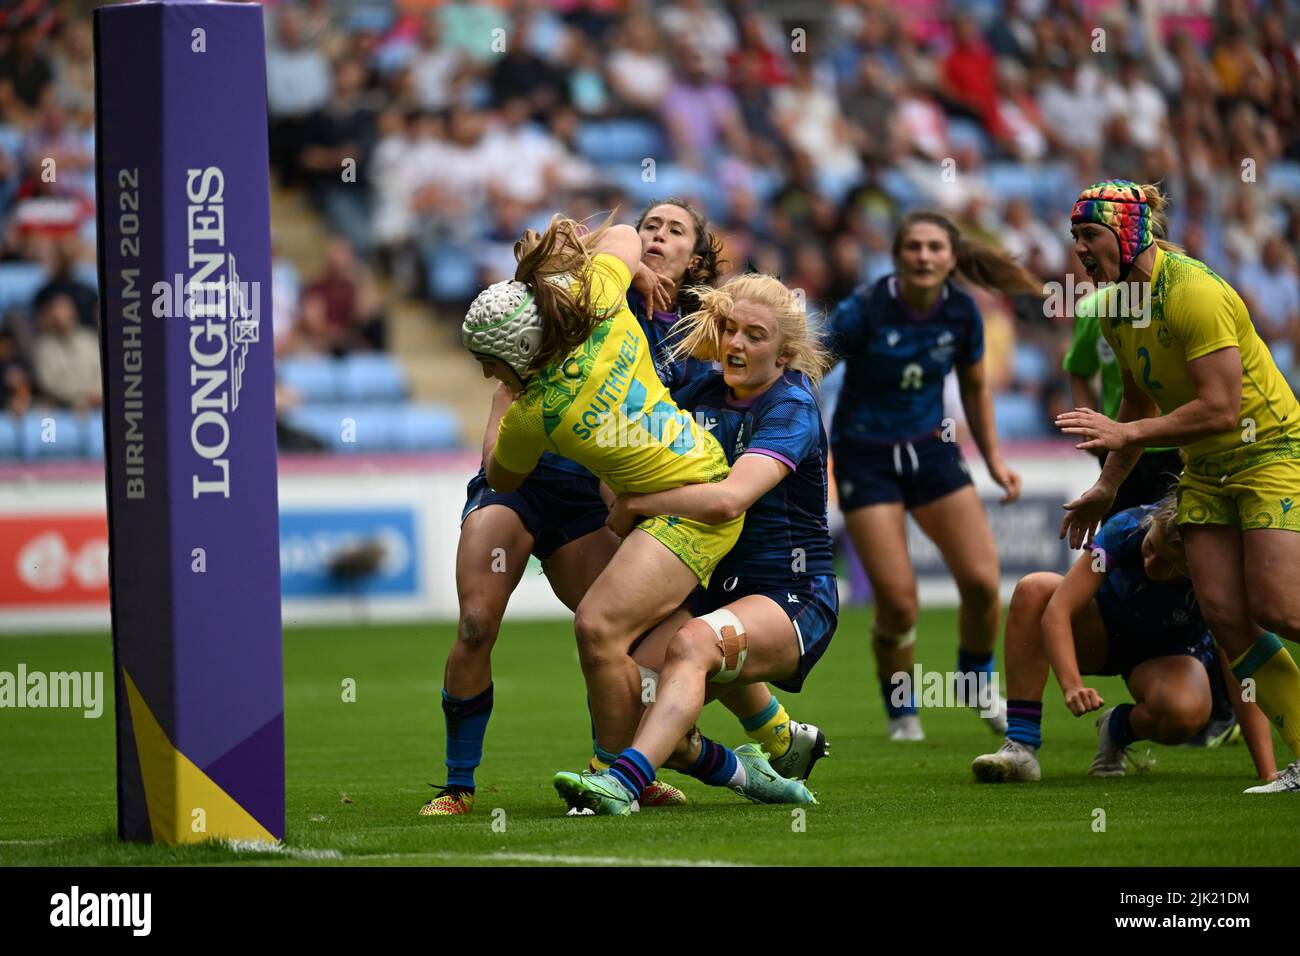 Faith Nathan of Australia scores a try during the Rugby Sevens at the Commonwealth Games at